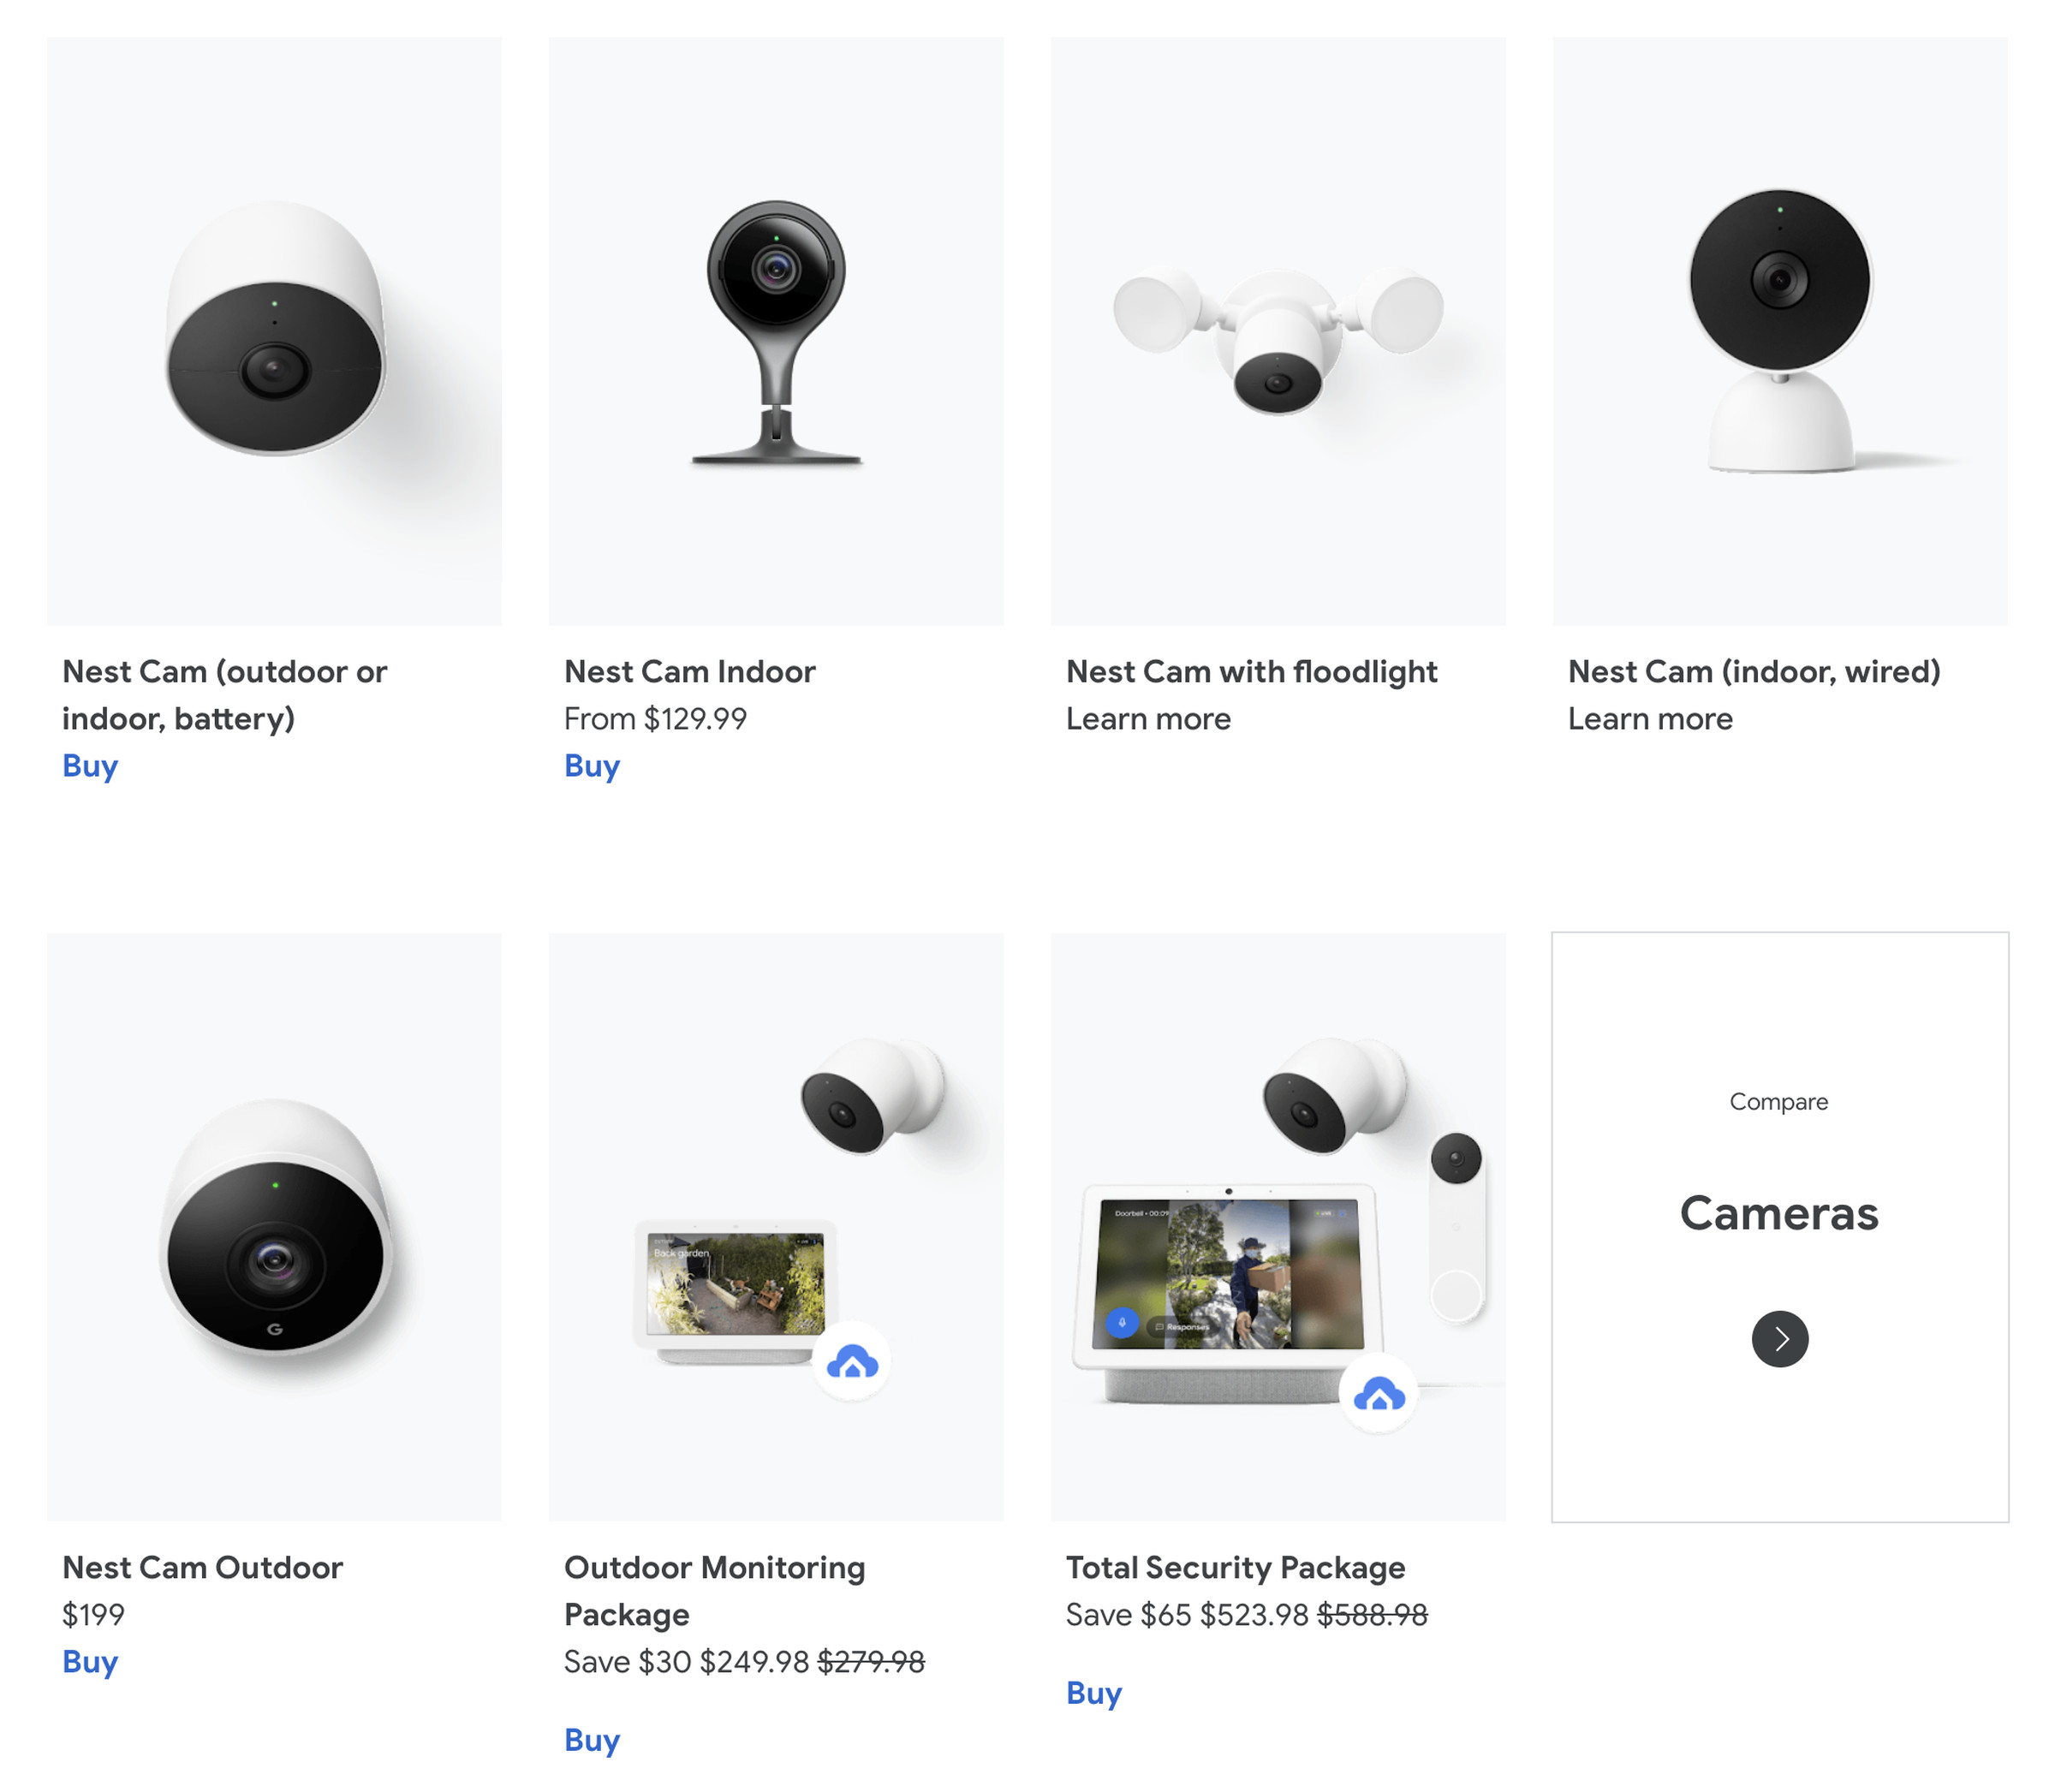 The only links that worked correctly on this page were the Nest Cam Indoor and the Nest Cam Outdoor. All the others sent us back to the Google Store homepage.